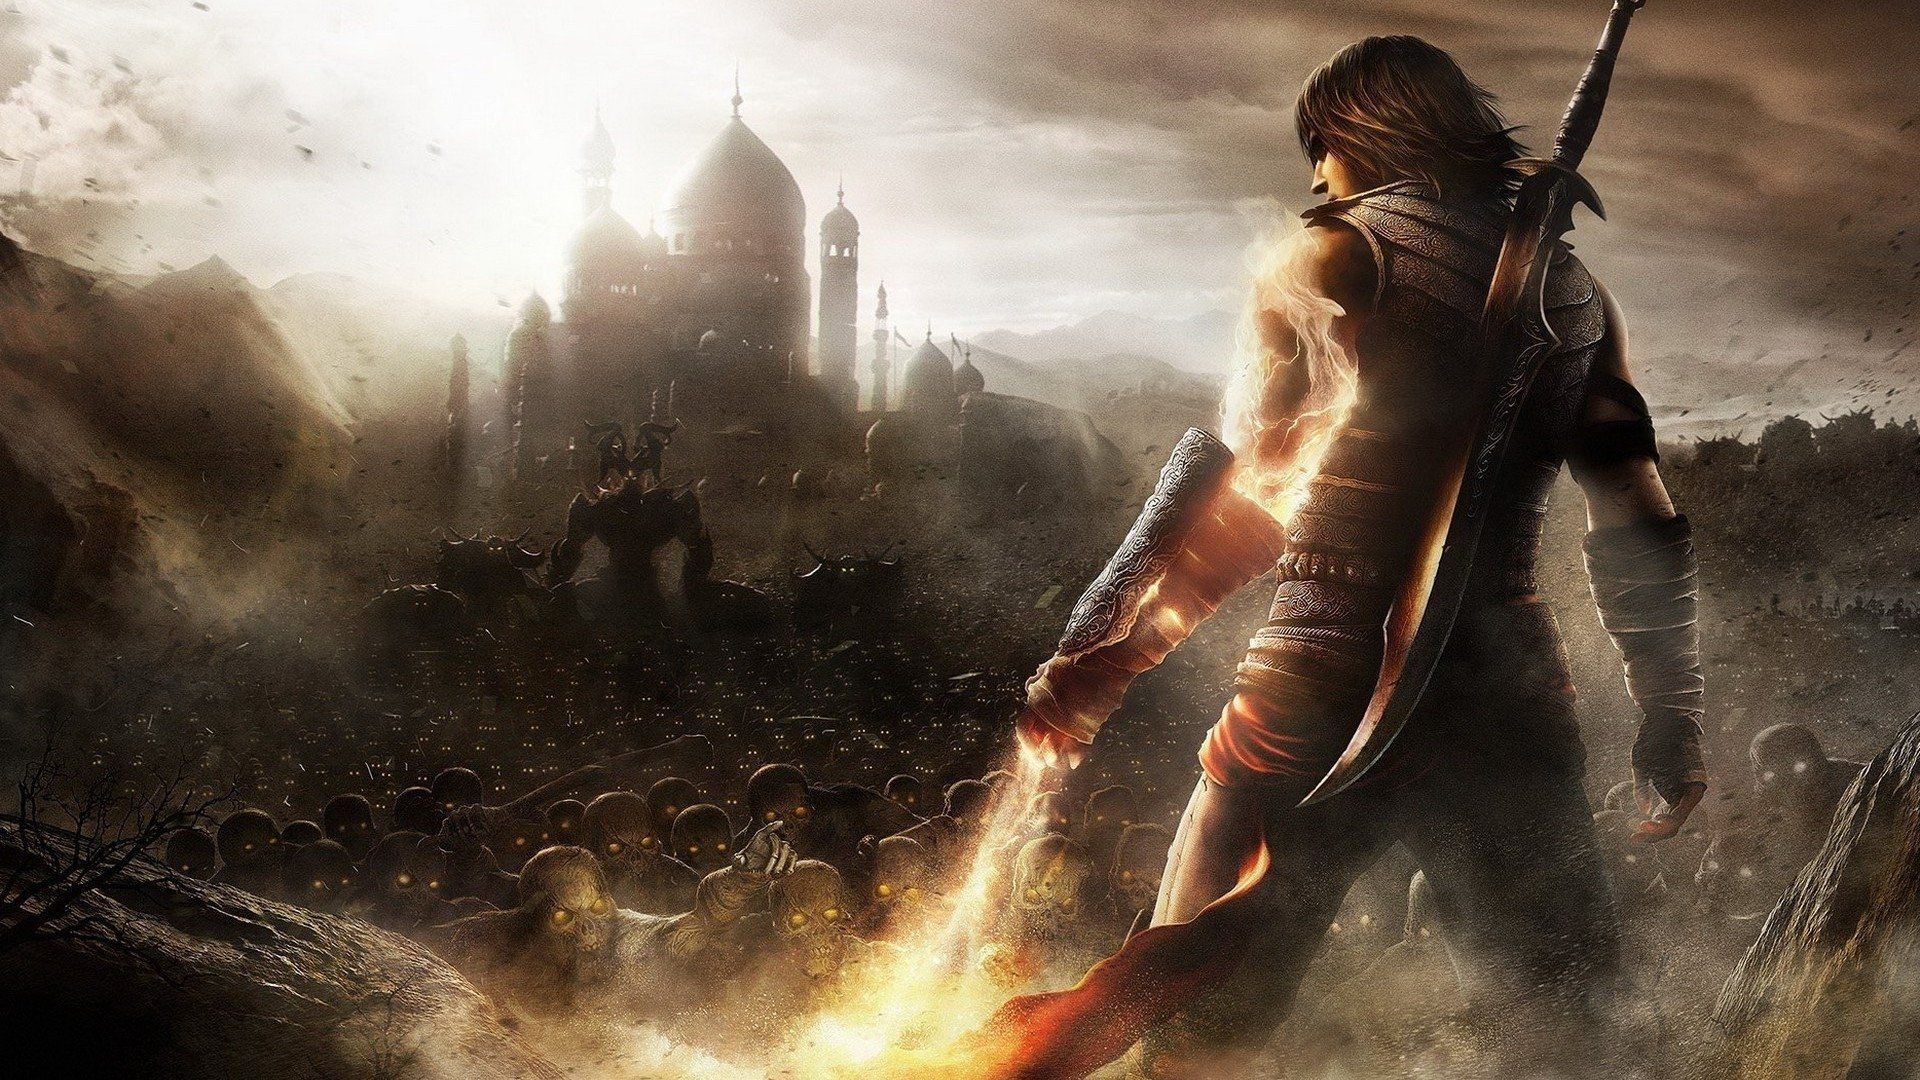 Prince Of Persia: The Sands Of Time Wallpapers